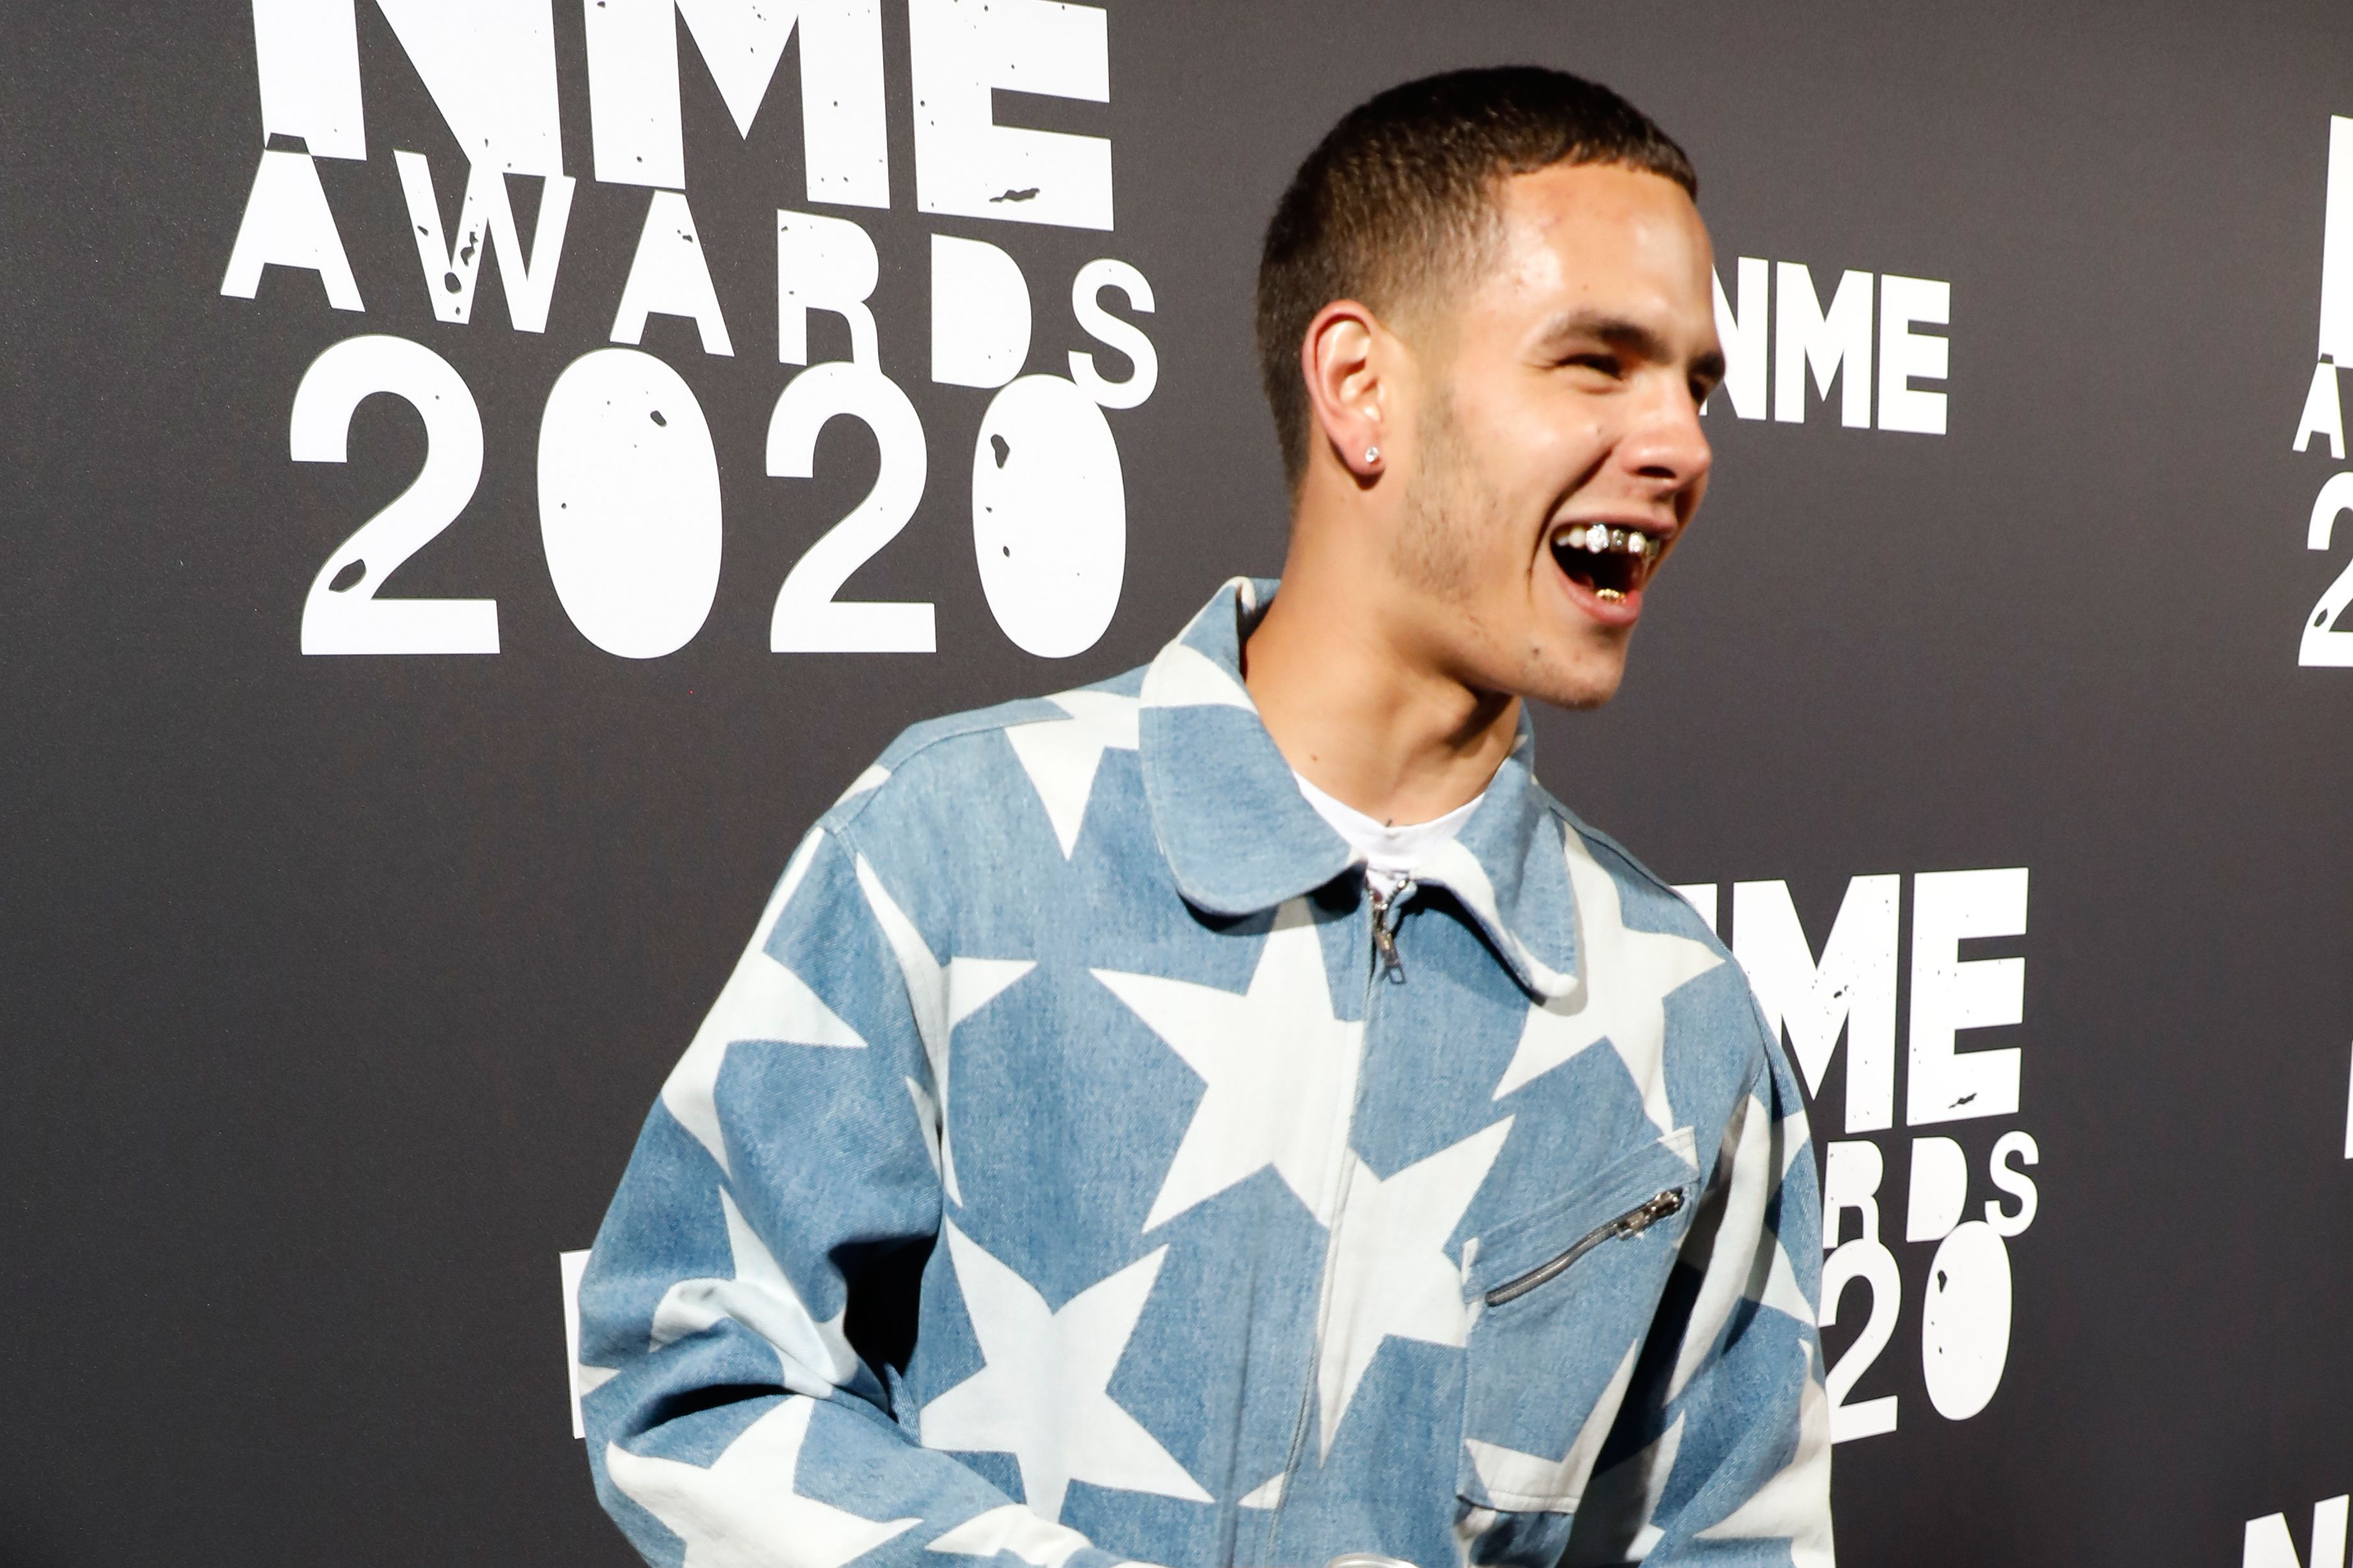 Slowthai replaced as AVA Belfast headliner amid rape charges